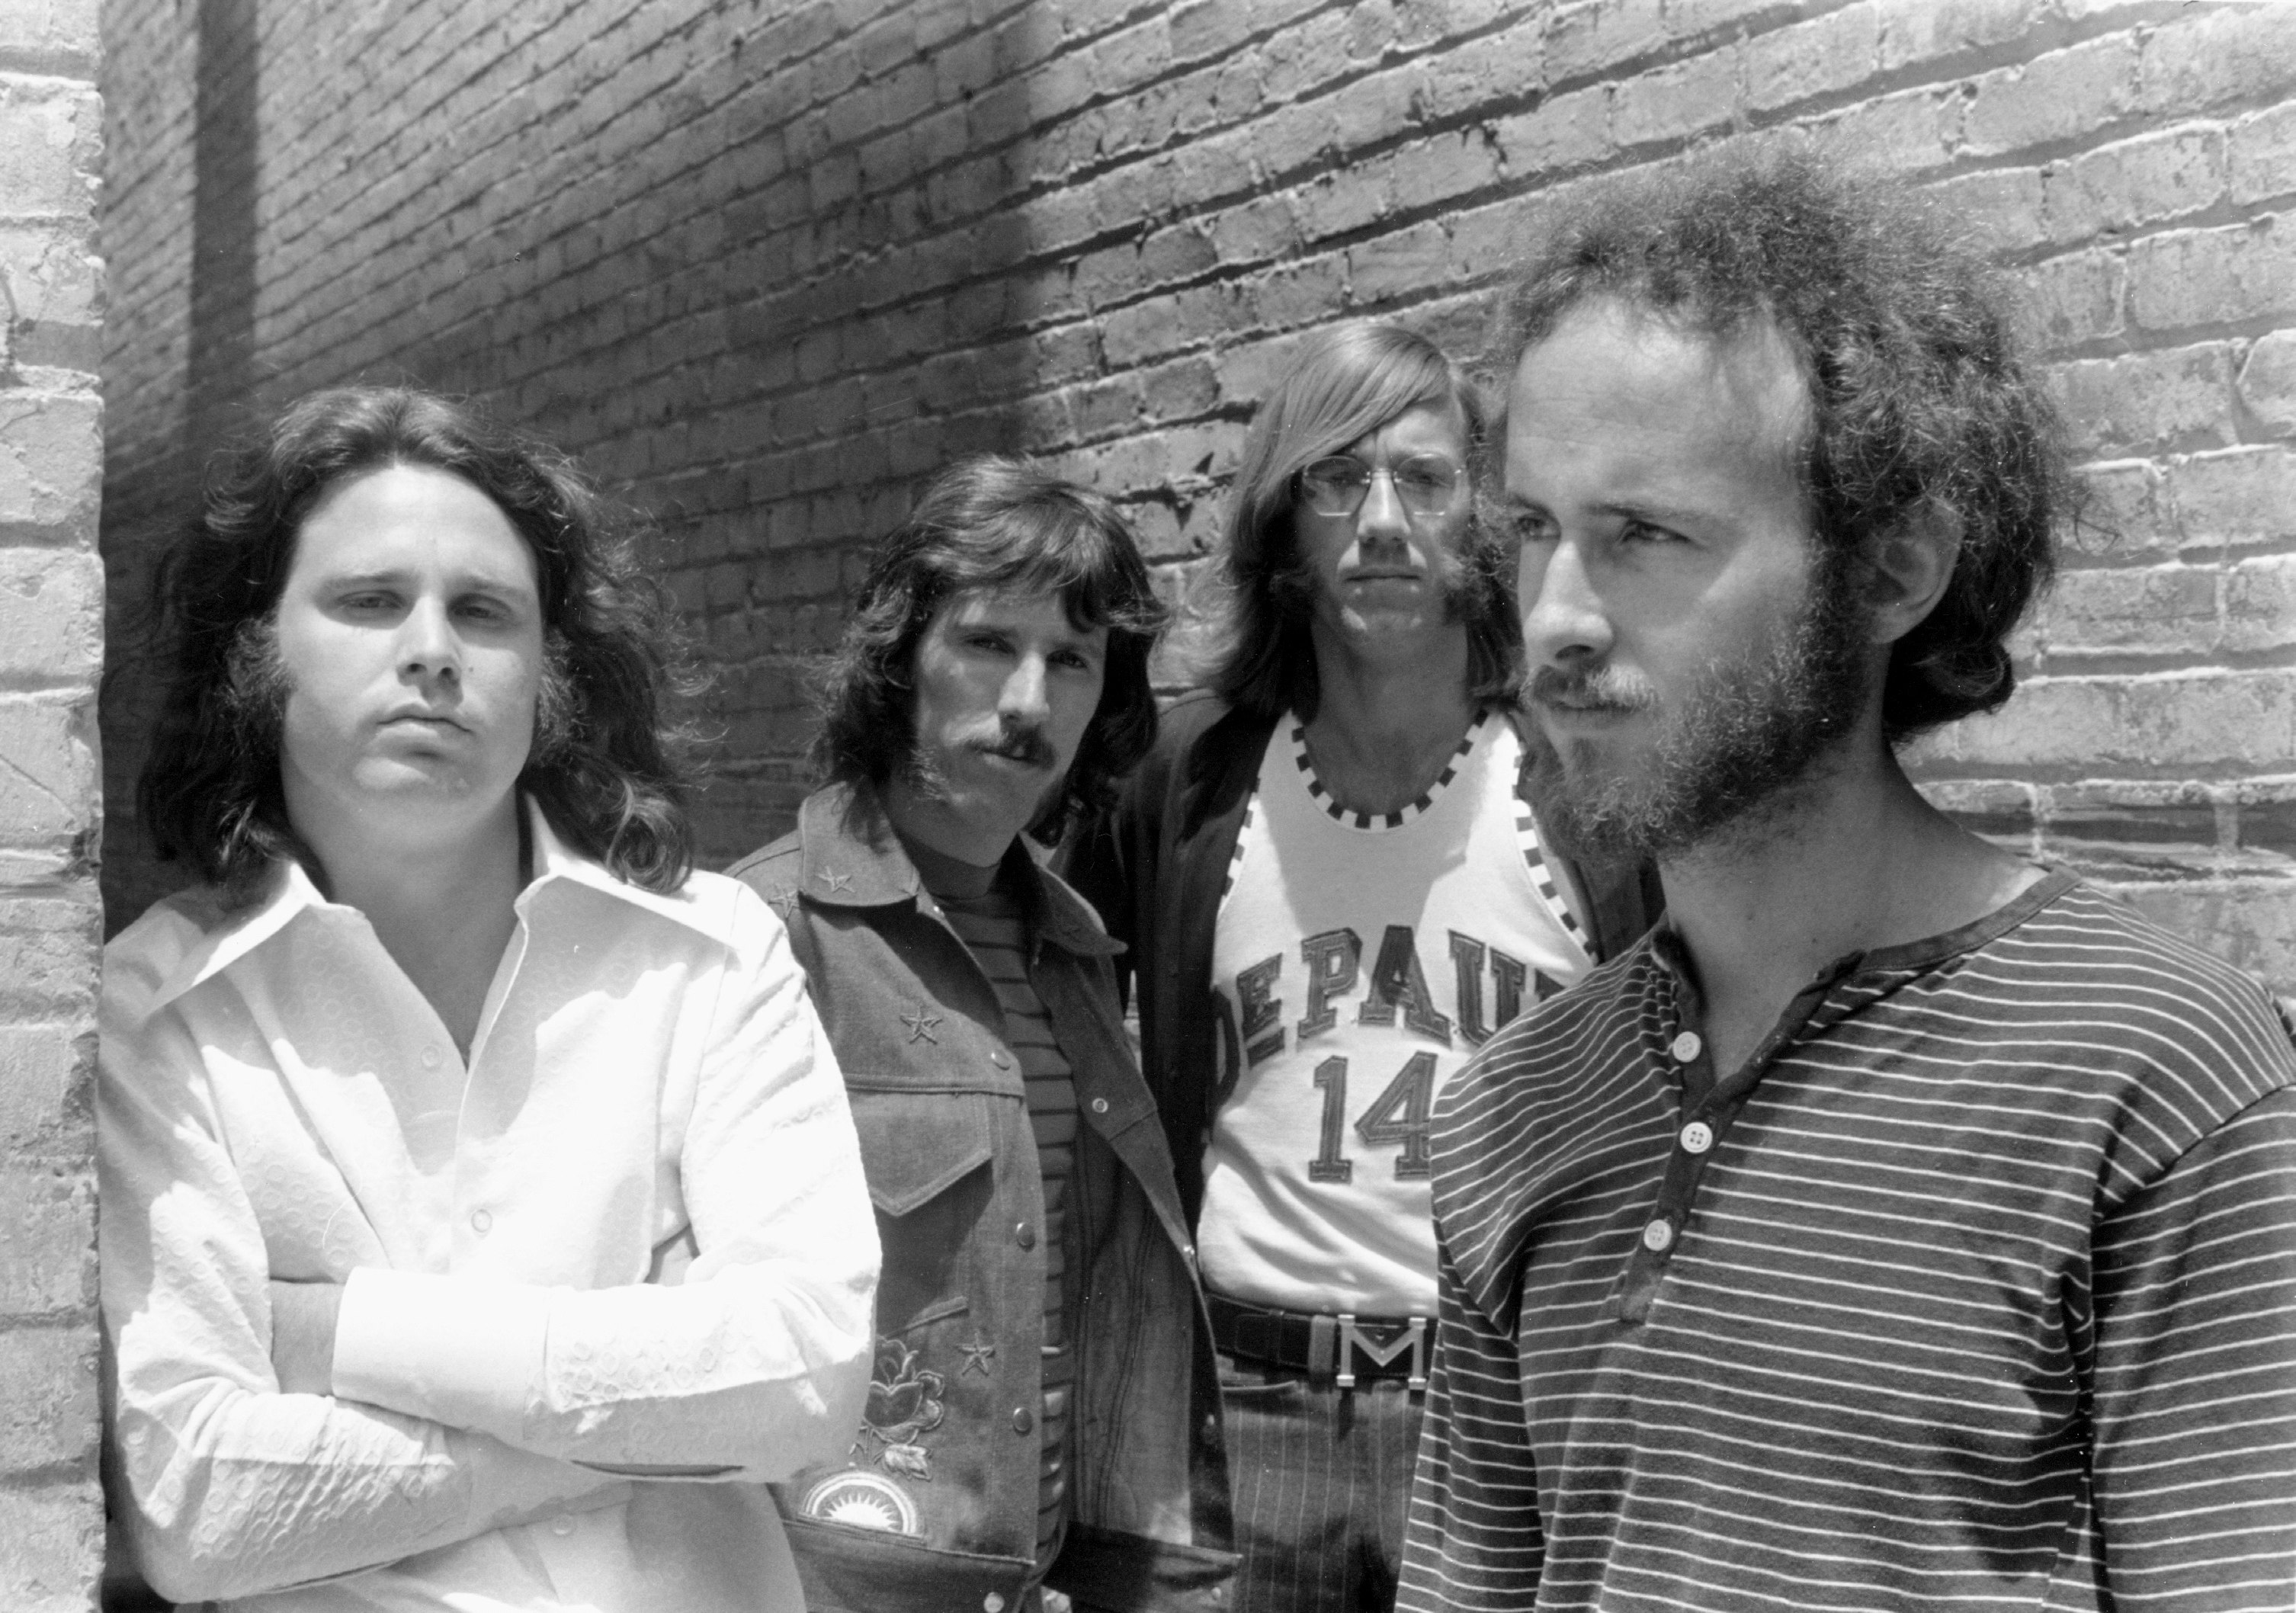 The Doors' John Densmore on His New Book About Musical Heroes